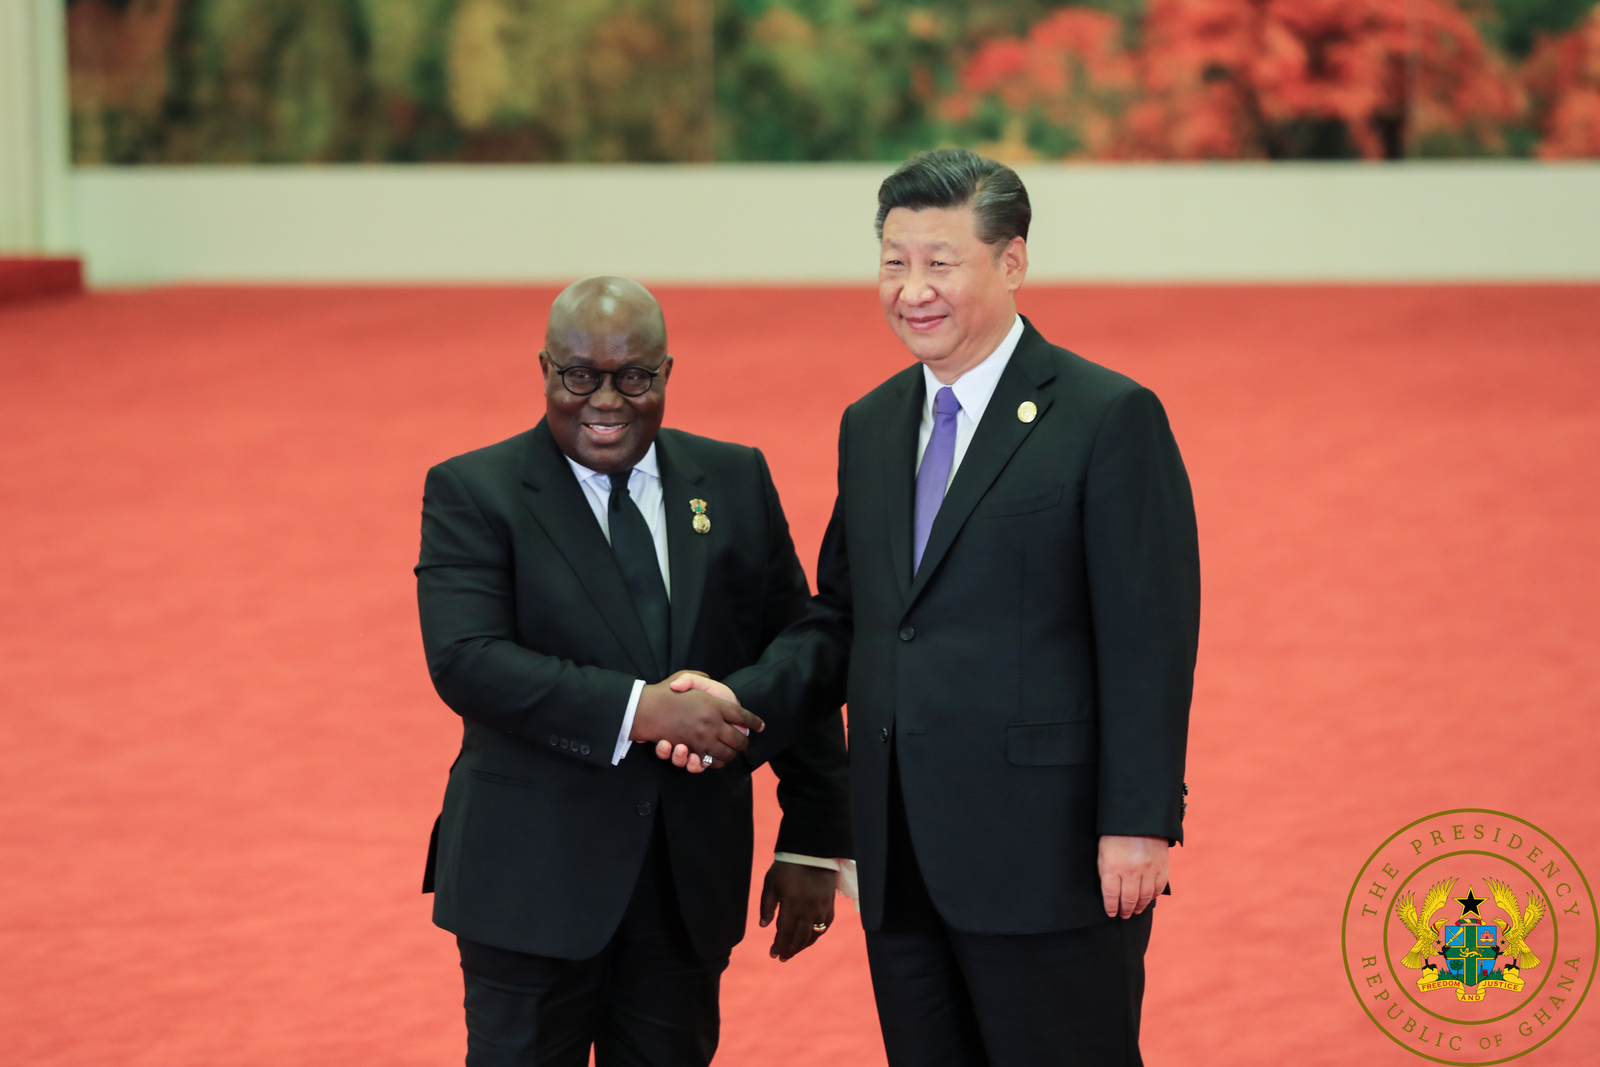 President AKufo-Addo with President Xi Jinping of China